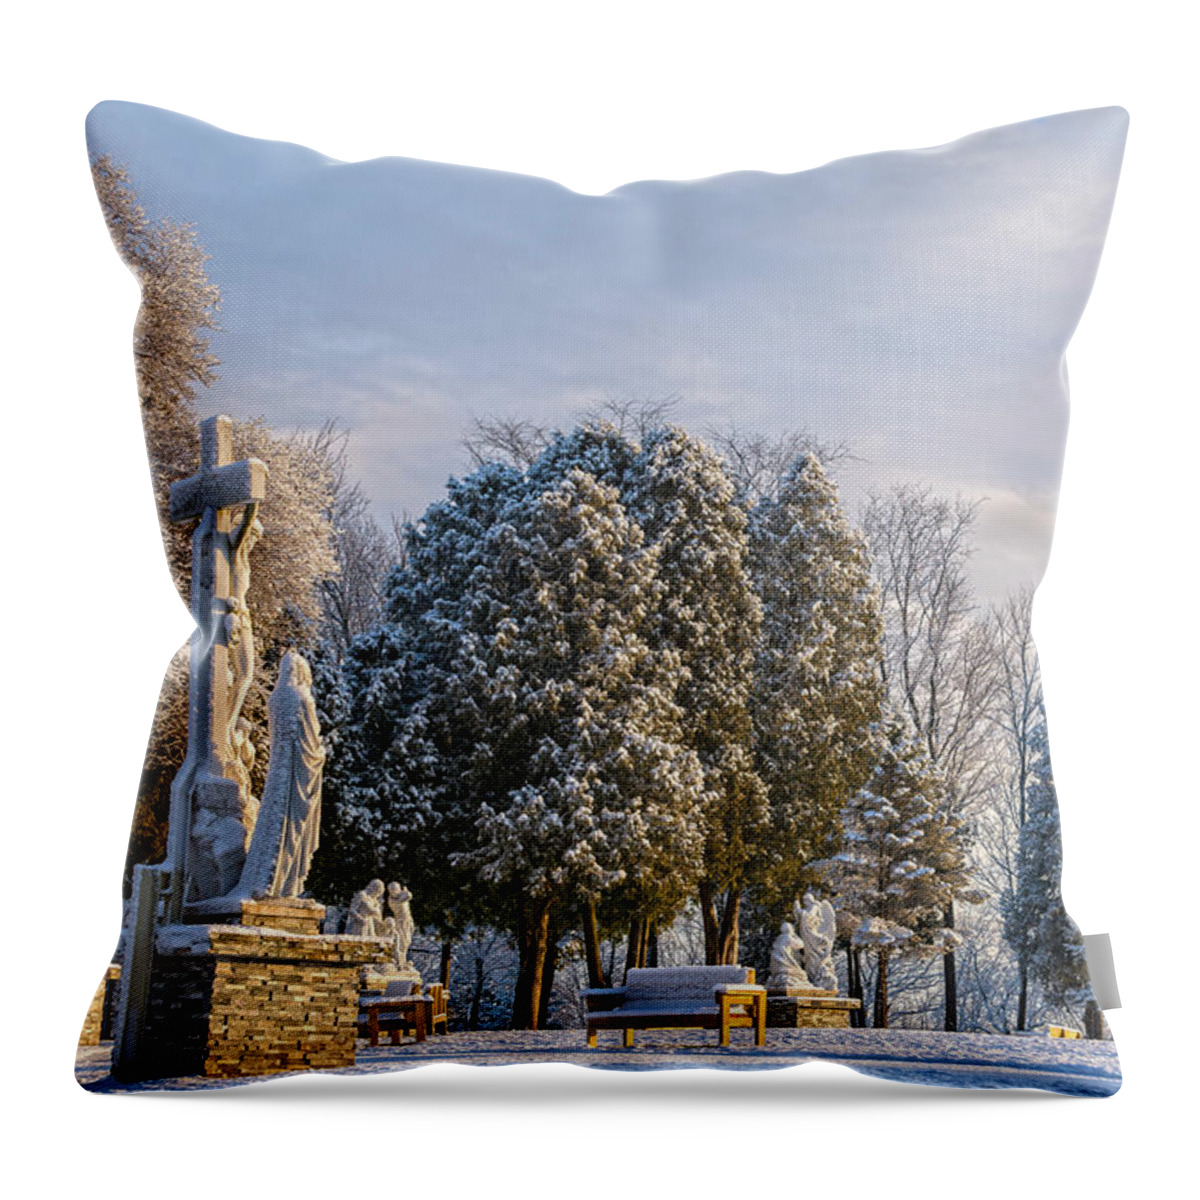 Ten Stations Of The Cross Throw Pillow featuring the photograph Ten Stations Of The Cross Christmas Morning by Angelo Marcialis